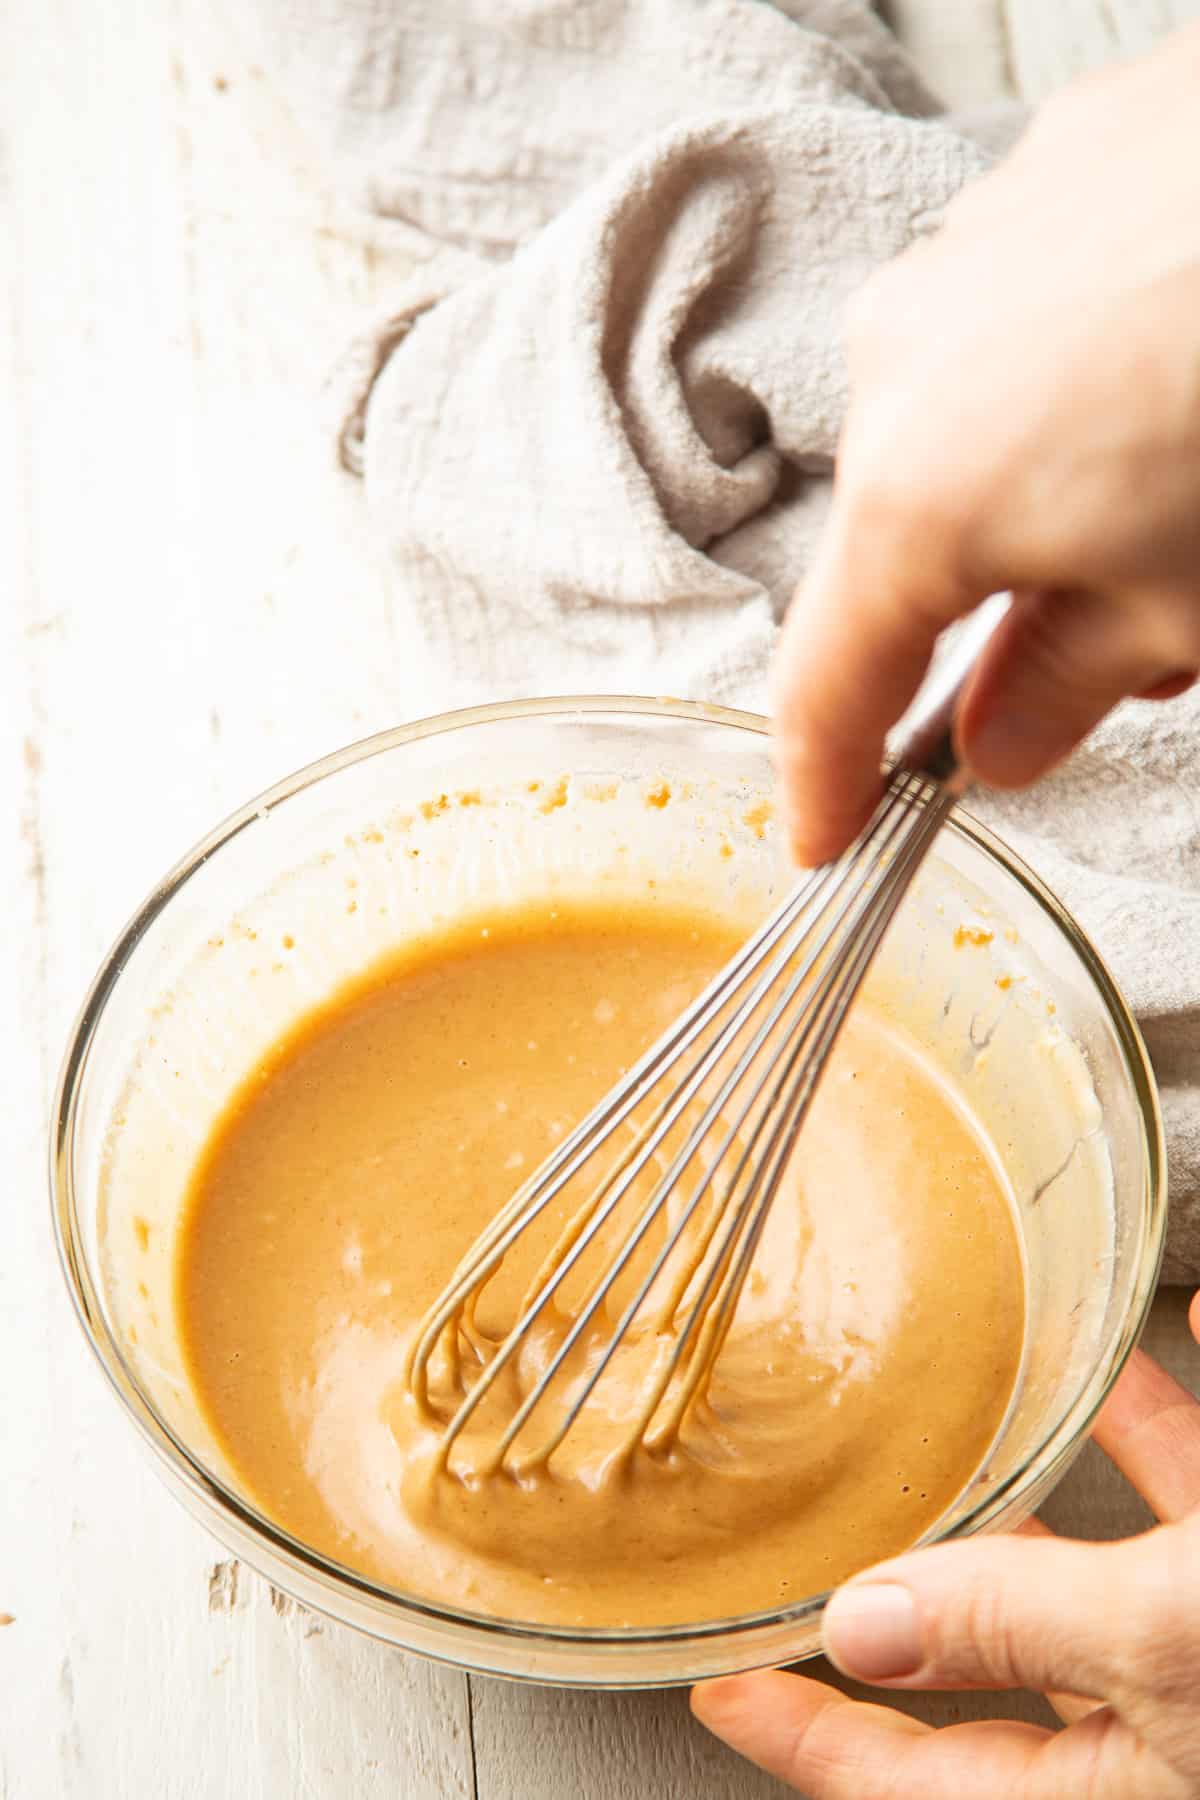 Hand whisking peanut sauce ingredients together in a bowl.